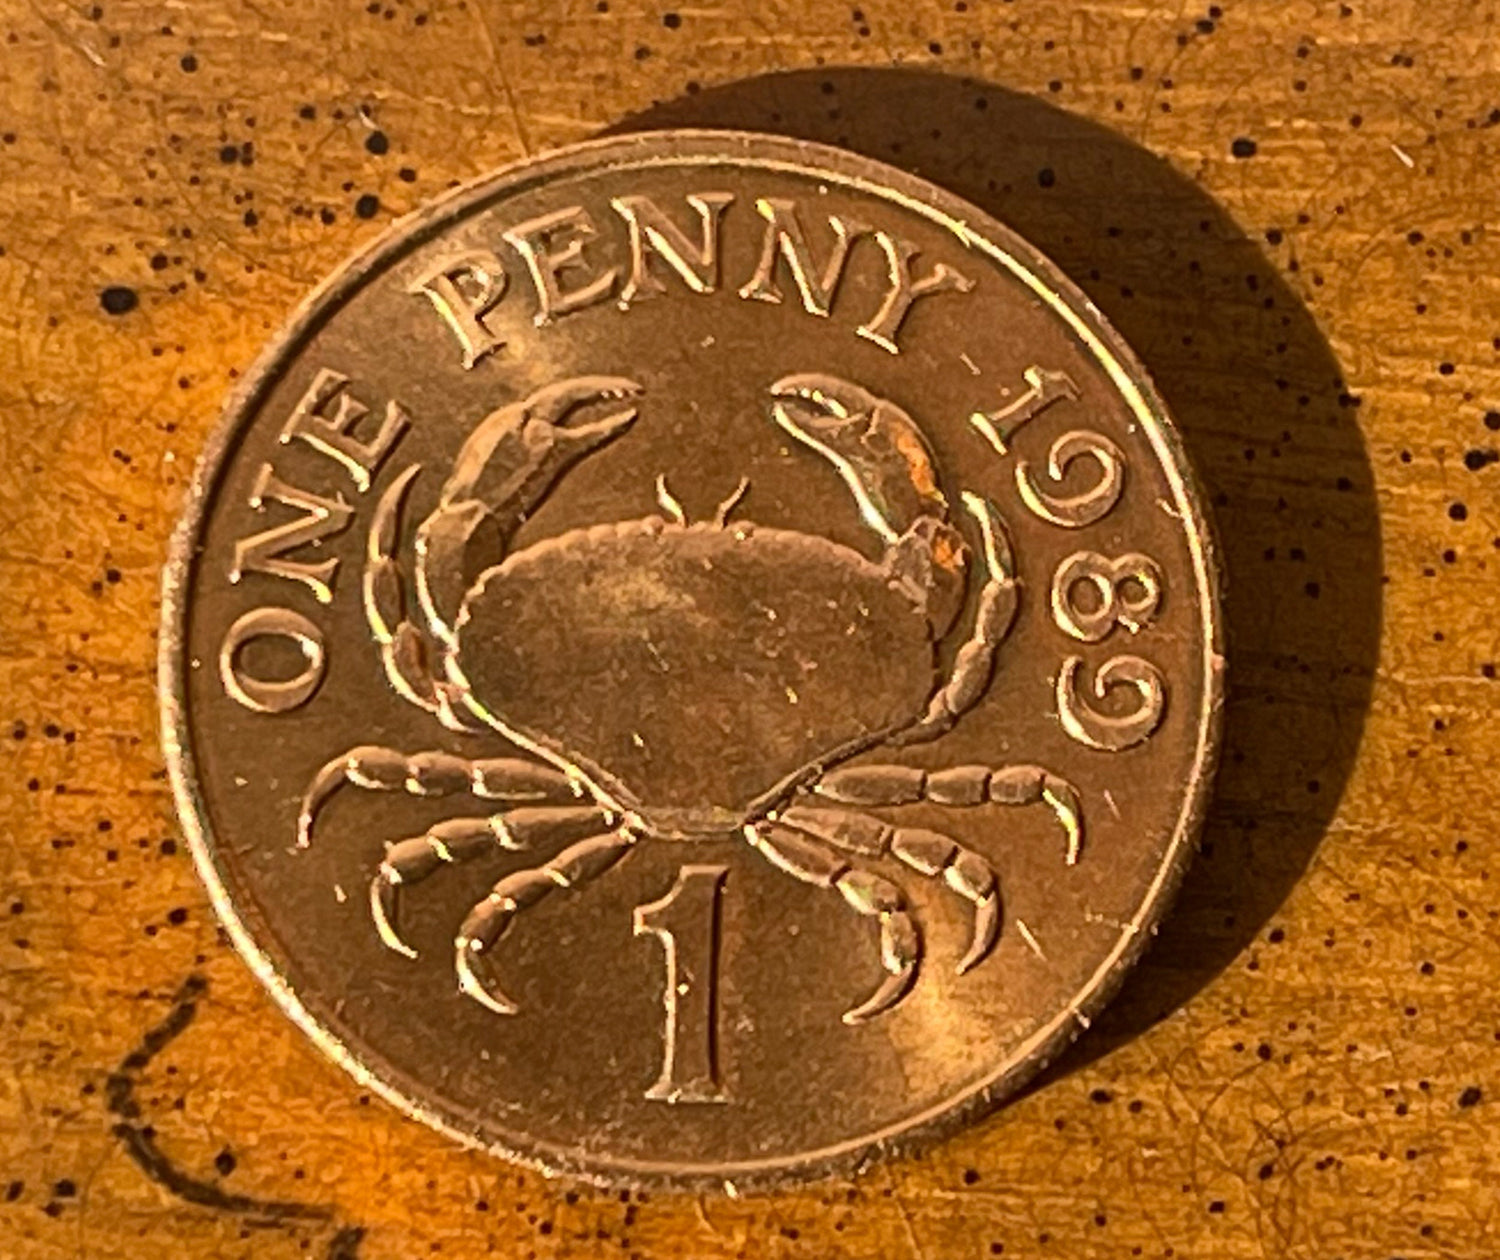 Crab Guernsey Islands Authentic Penny for Jewelry and Craft Making